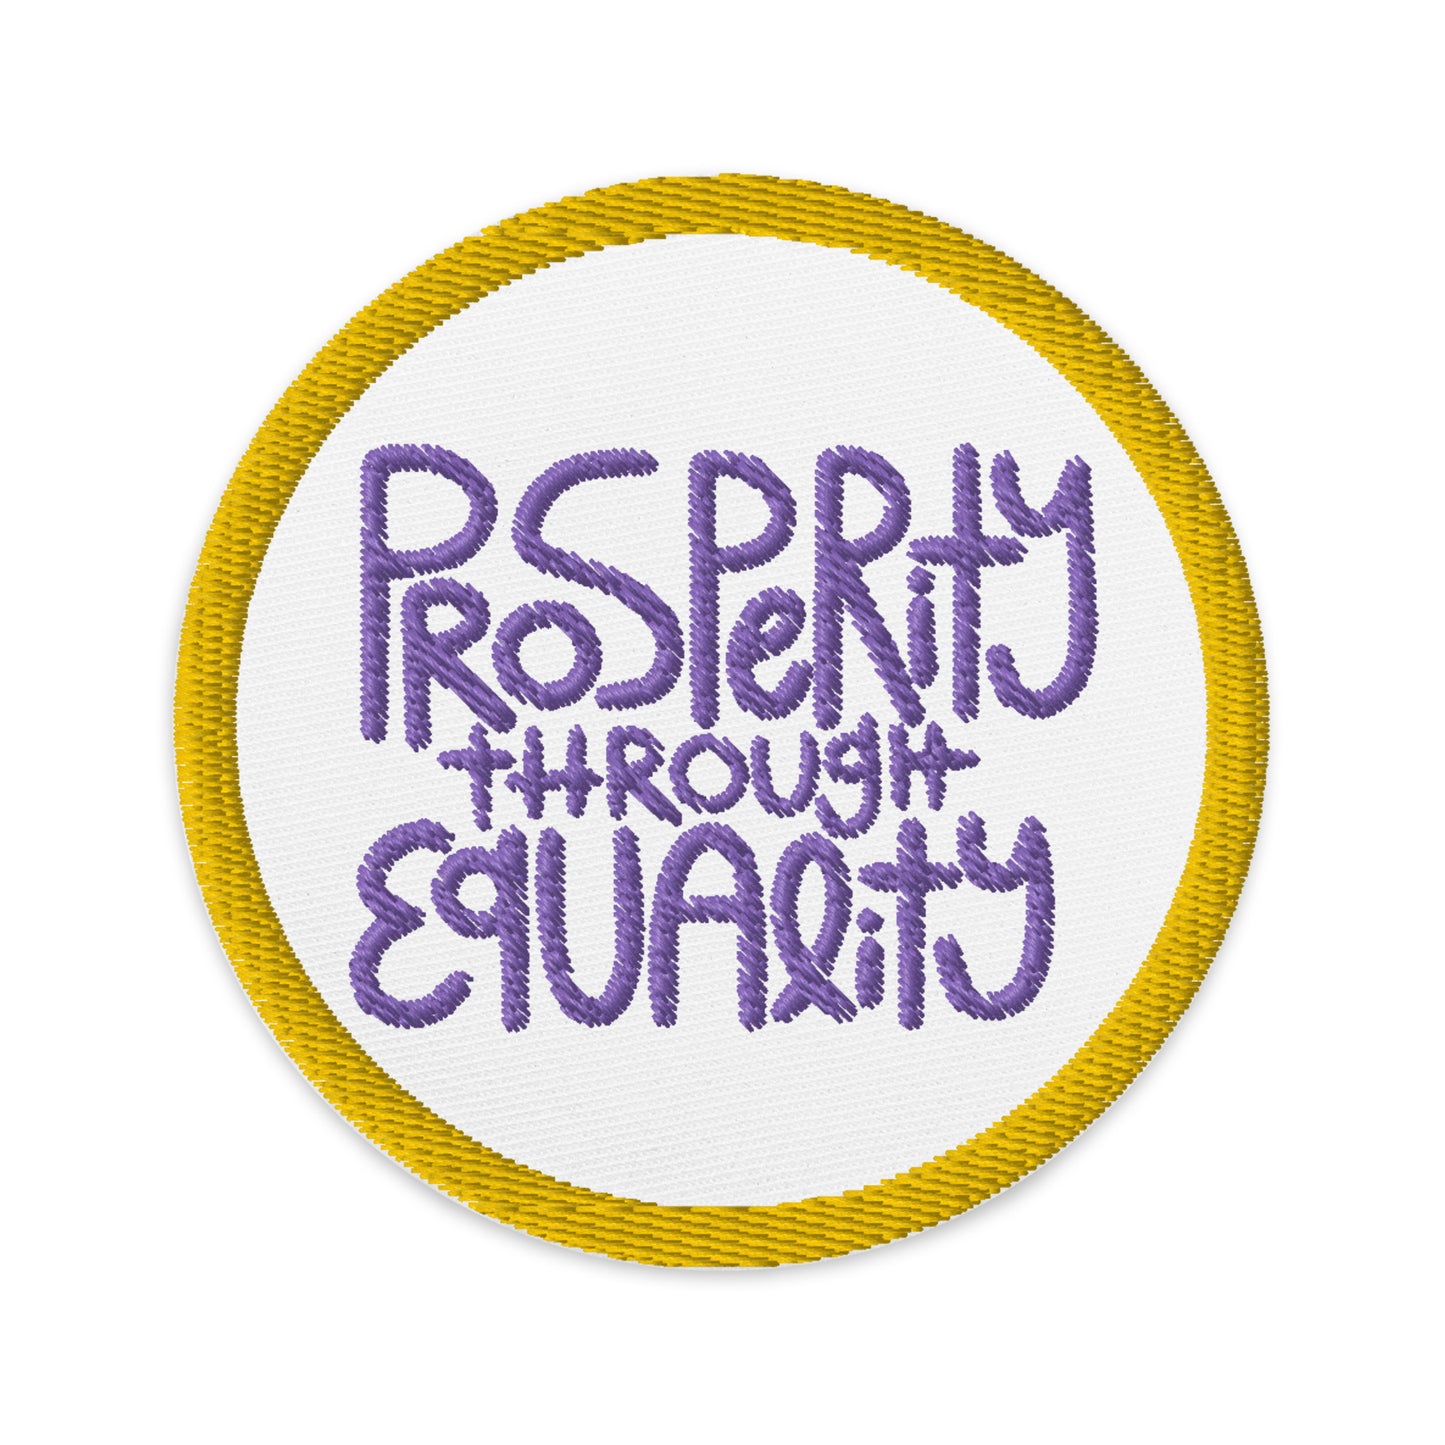 white, circular patch with an embroidered gold border. In the center of the patch with purple embroidery it read "Prosperity through equality."